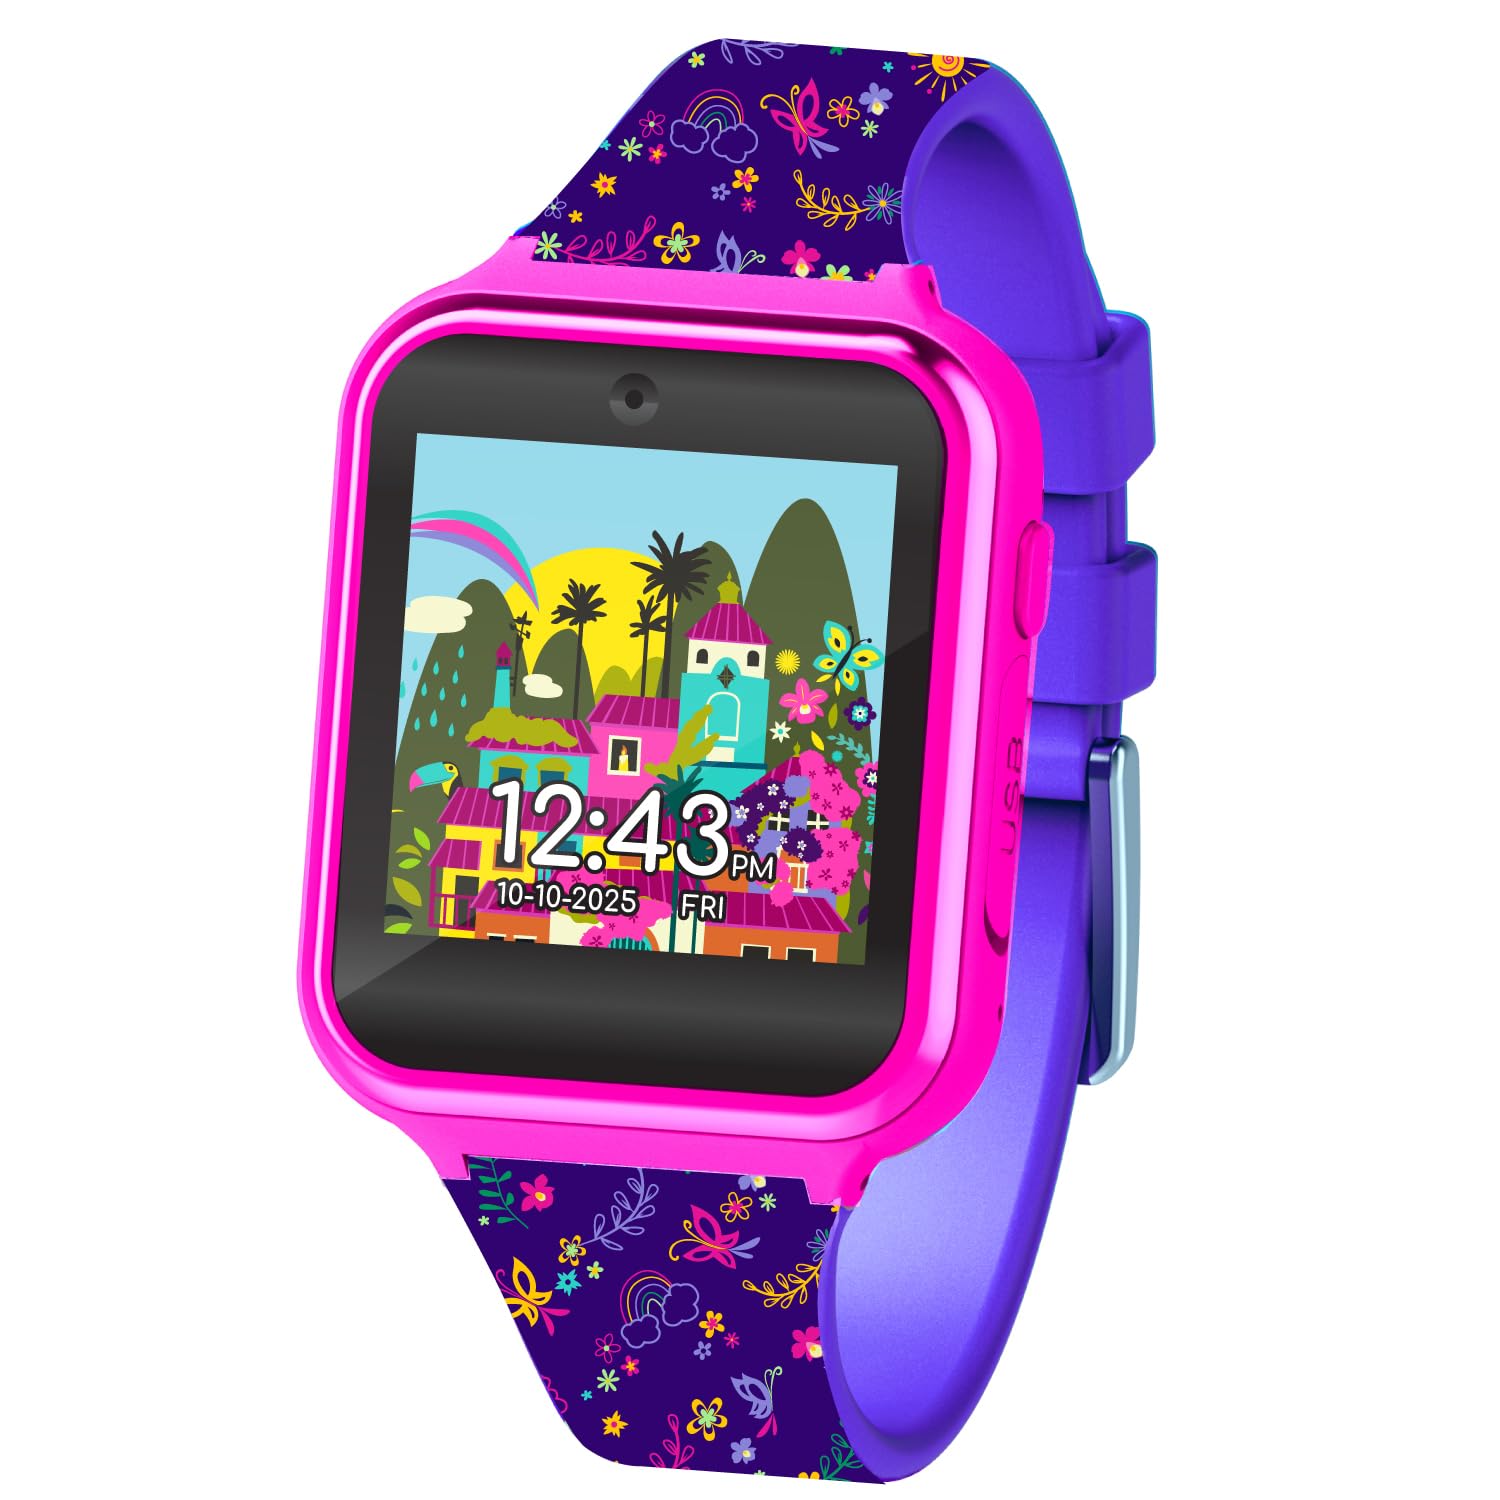 Accutime Encanto Educational Learning Touchscreen Kids Smartwatch - Multicolor Strap - Toy - Girls, Boys, Toddlers - Selfie Cam, Games, Alarm, Calculator, Pedometer (Model: ENC4015AZ)